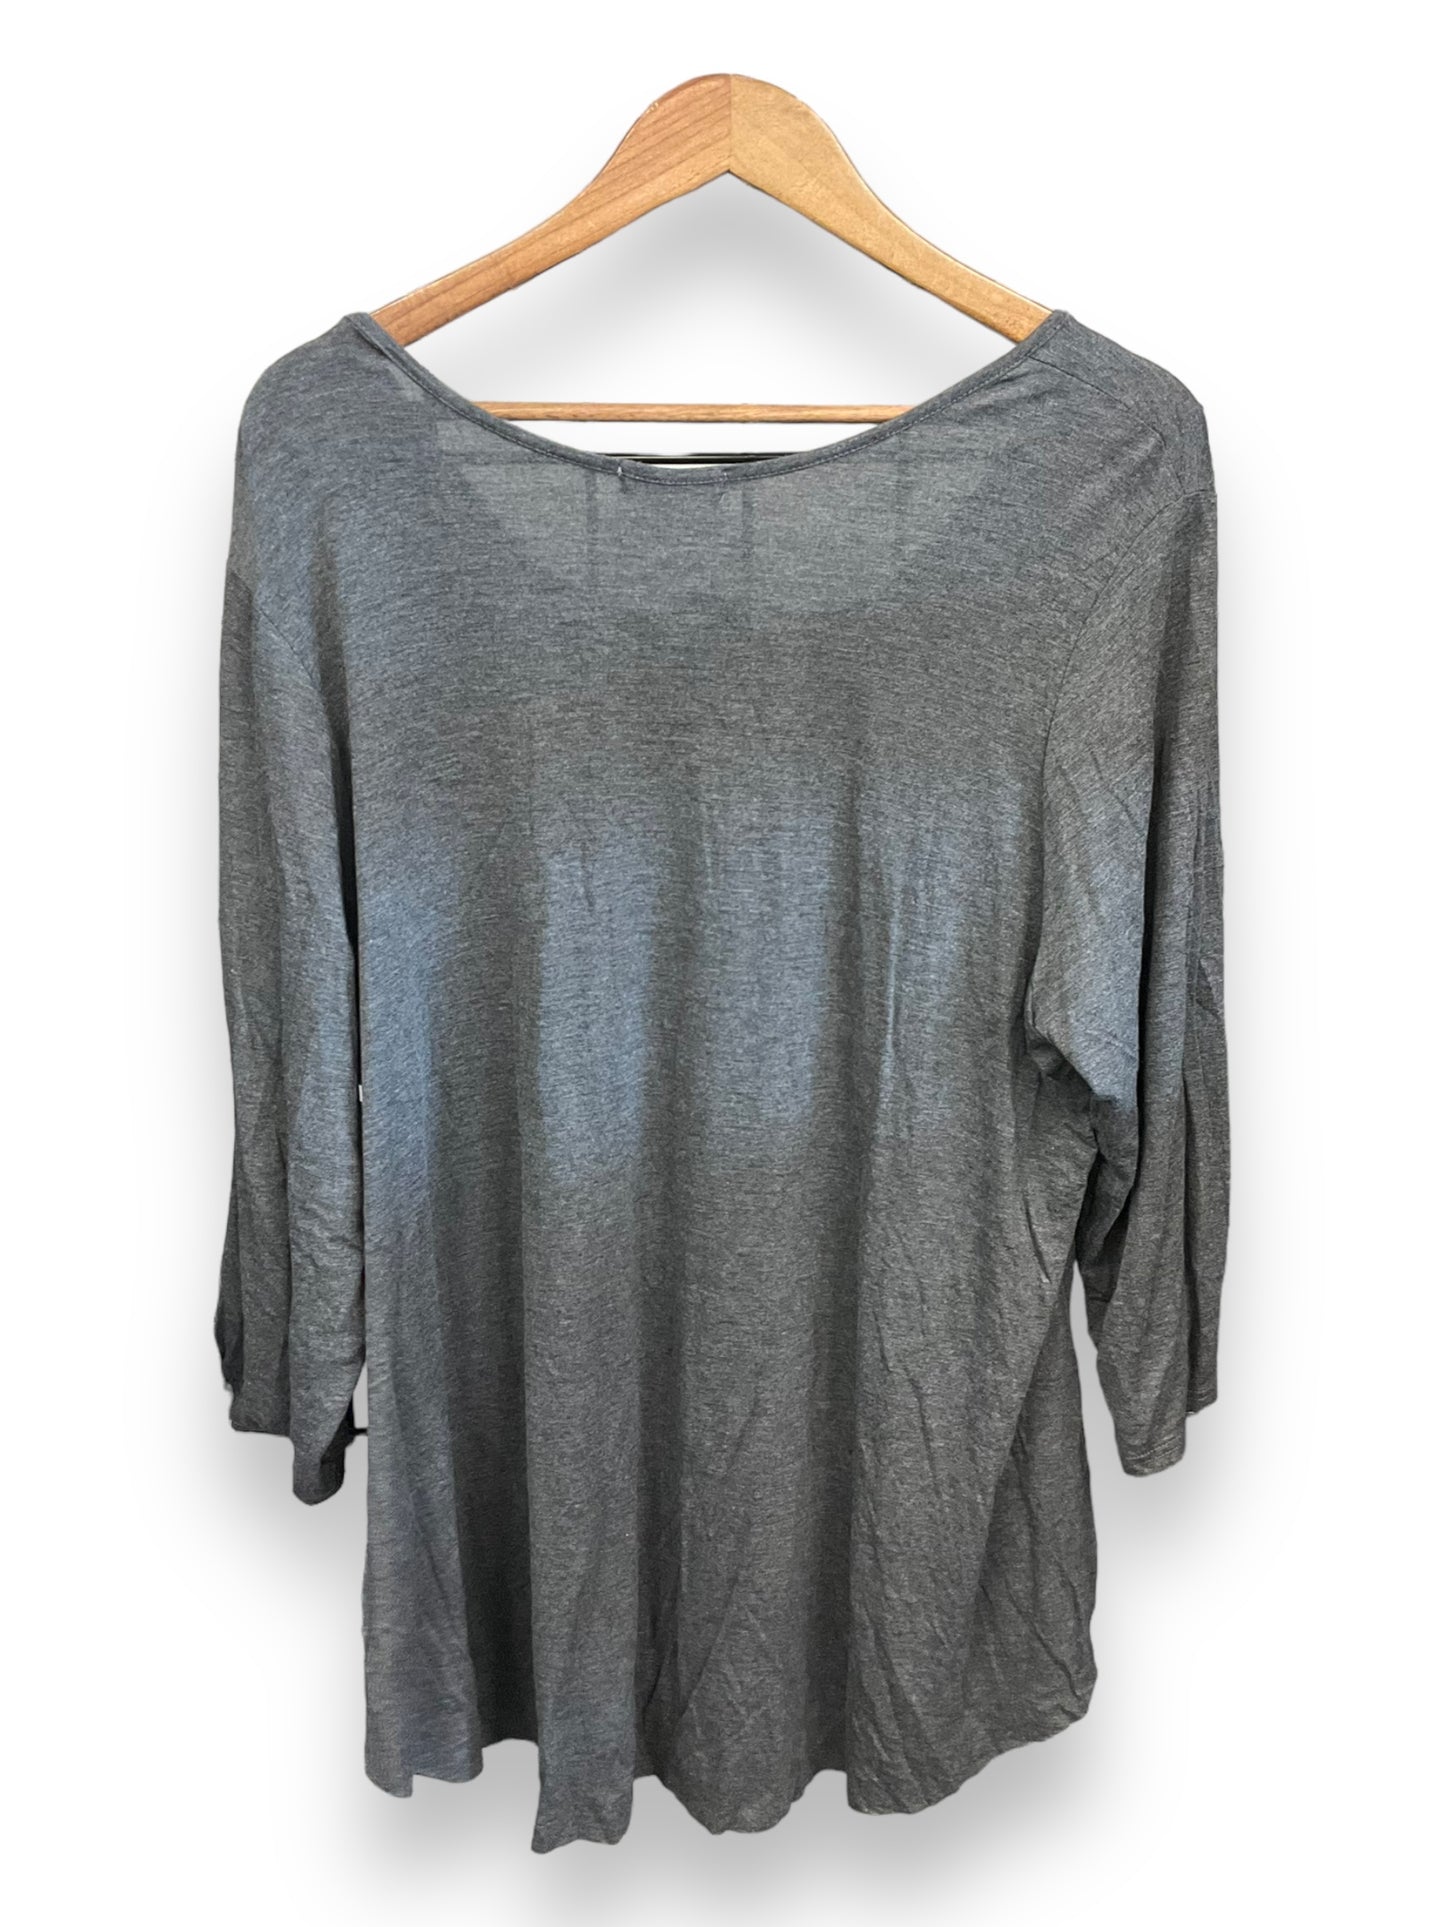 Top Long Sleeve Basic By Maurices  Size: 3x